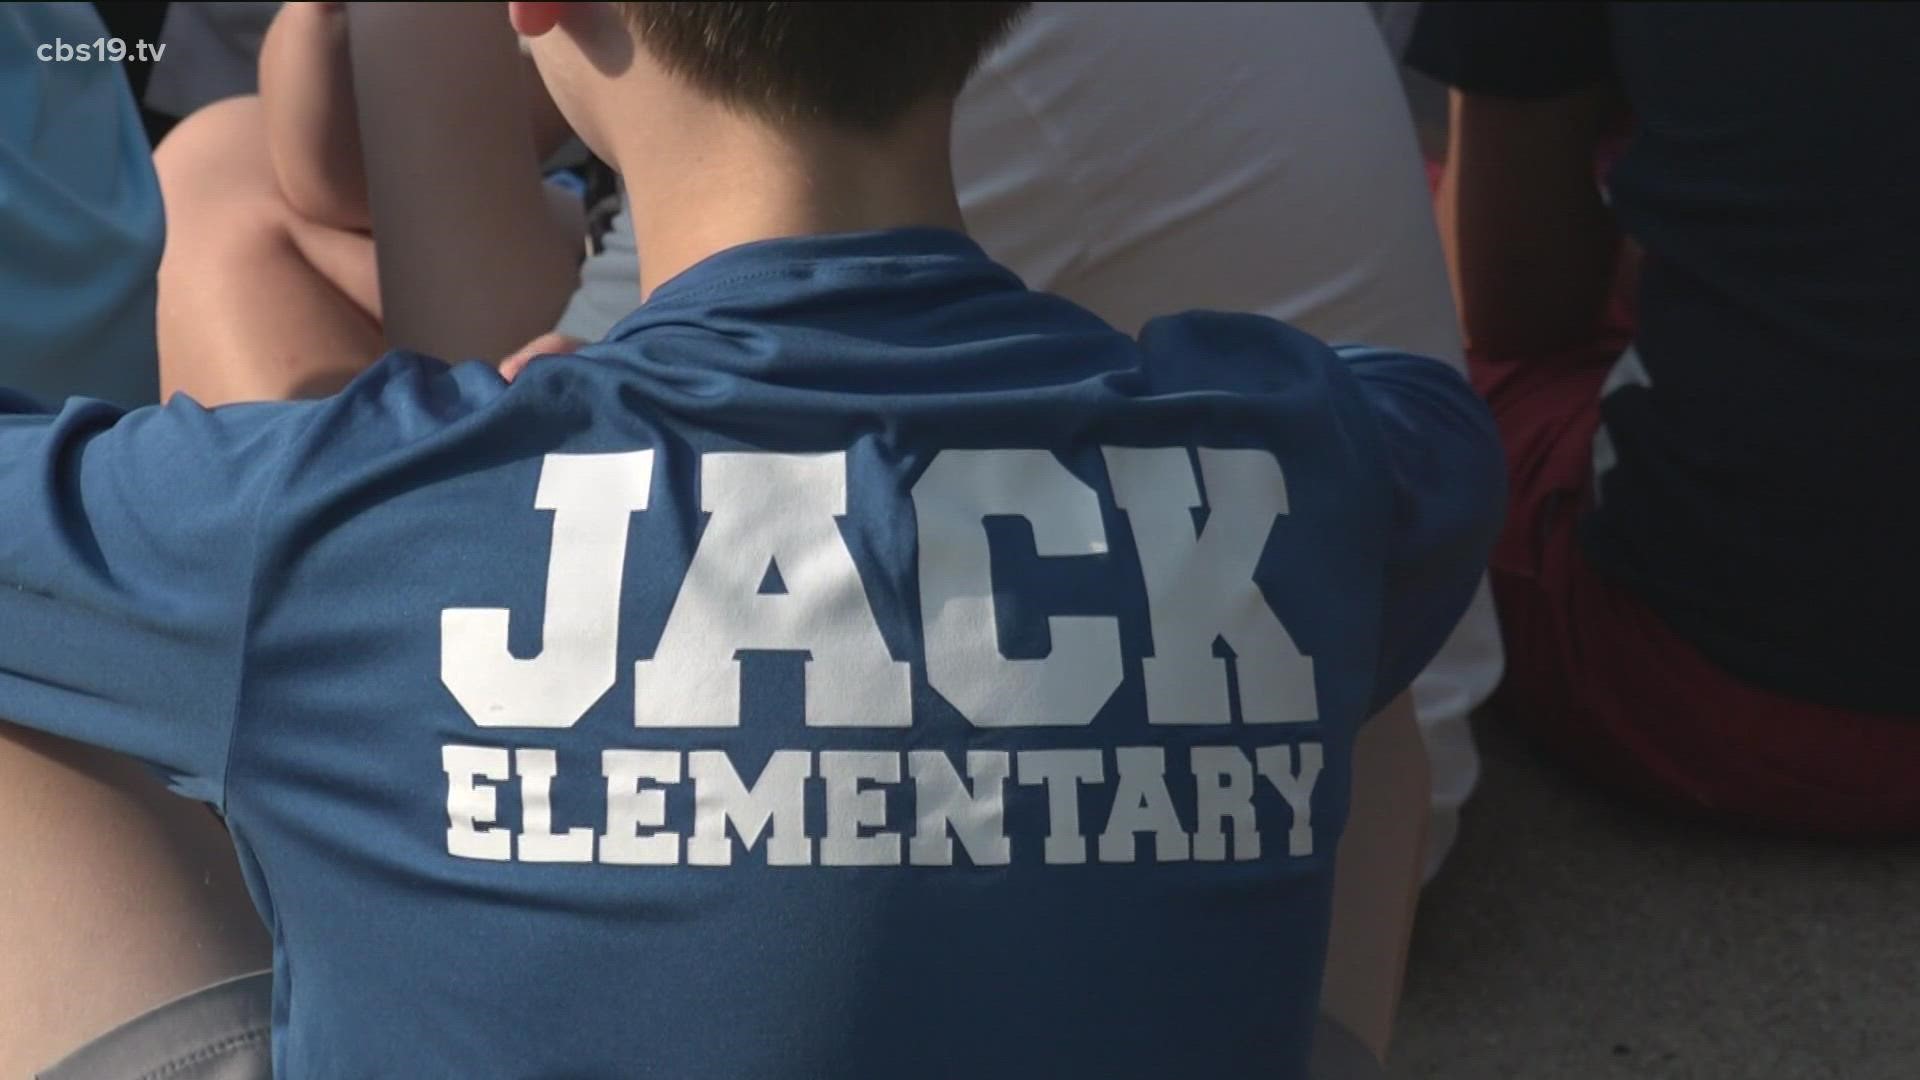 Dr. Bryan C. Jack’s Elementary held its 20th annual Patriot Day honoring the school's namesake who died in the 9/11 attacks.